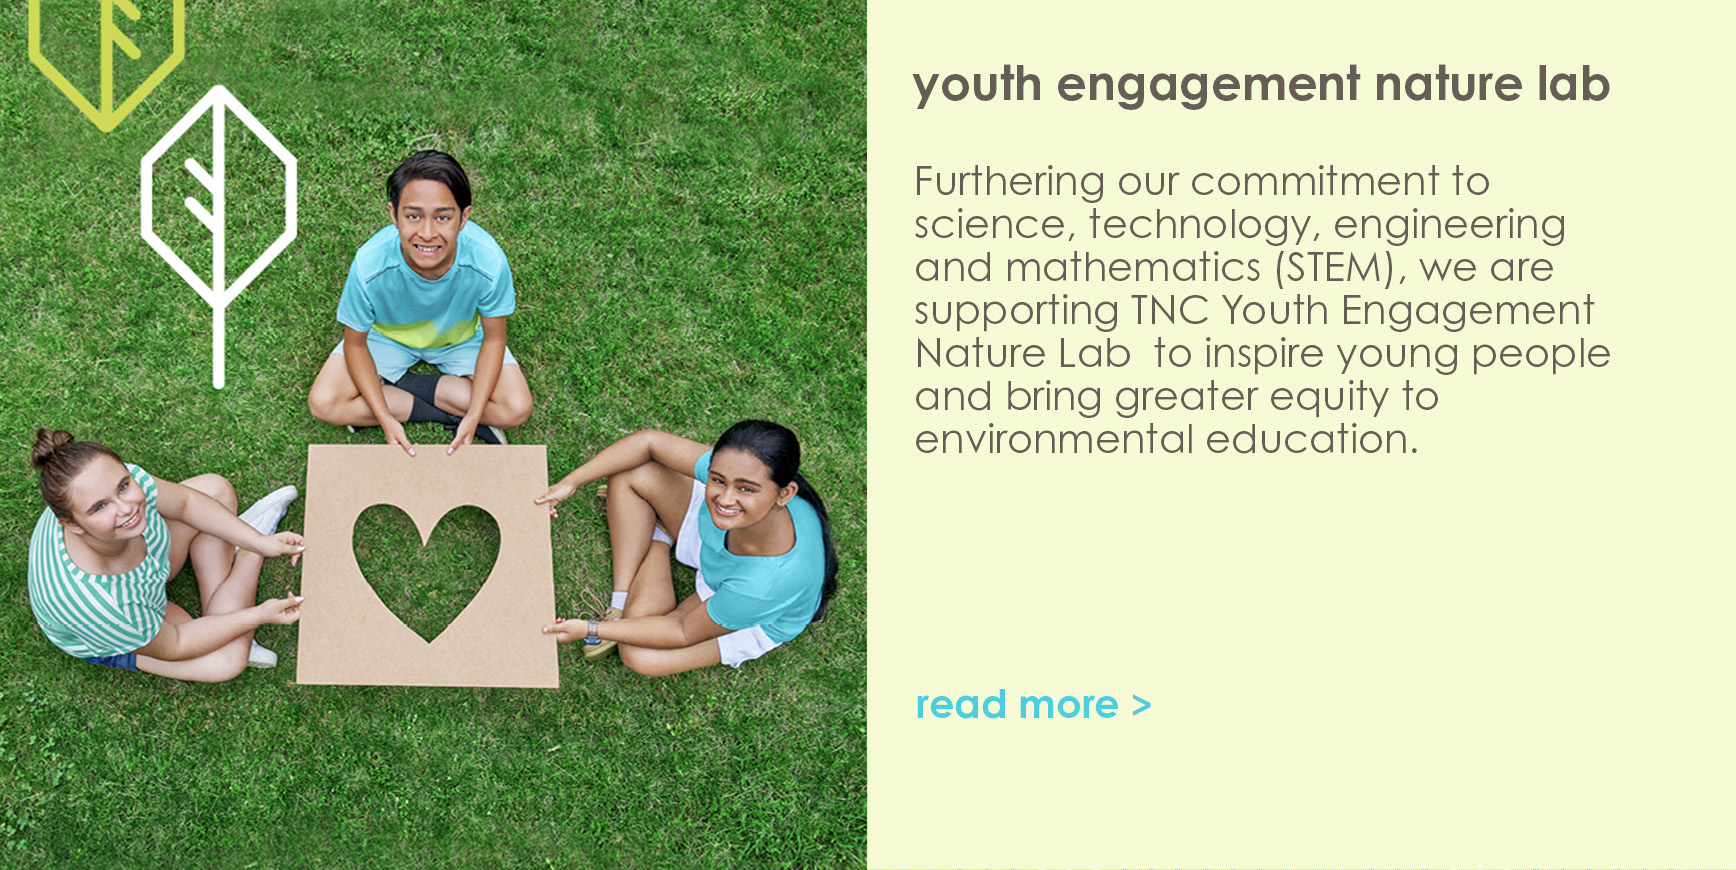 youth engagement lab callout 1006.jpg